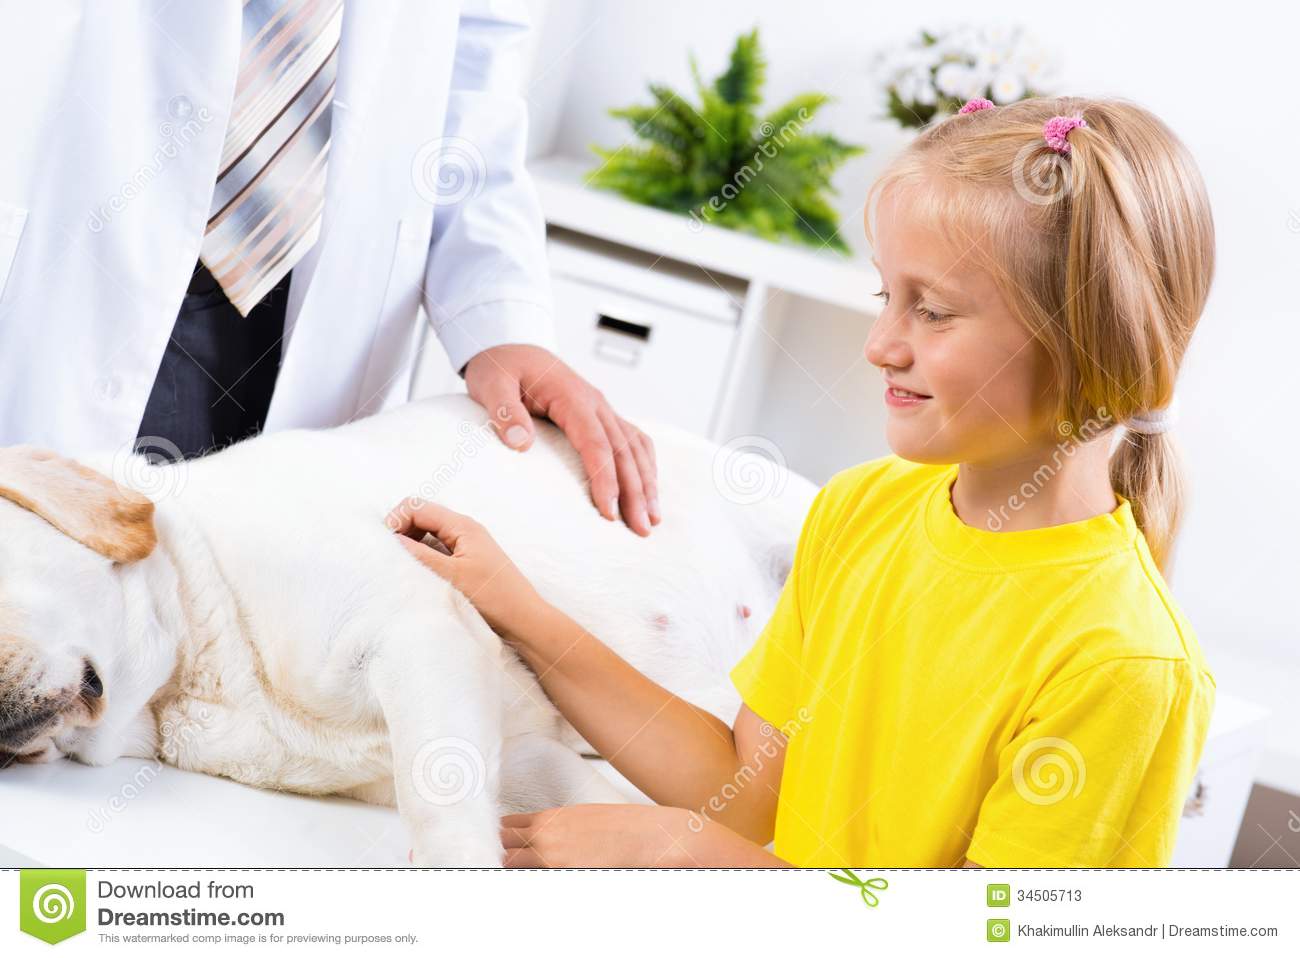 Girl Holds A Dog In A Veterinary Clinic Stock Photos   Image  34505713